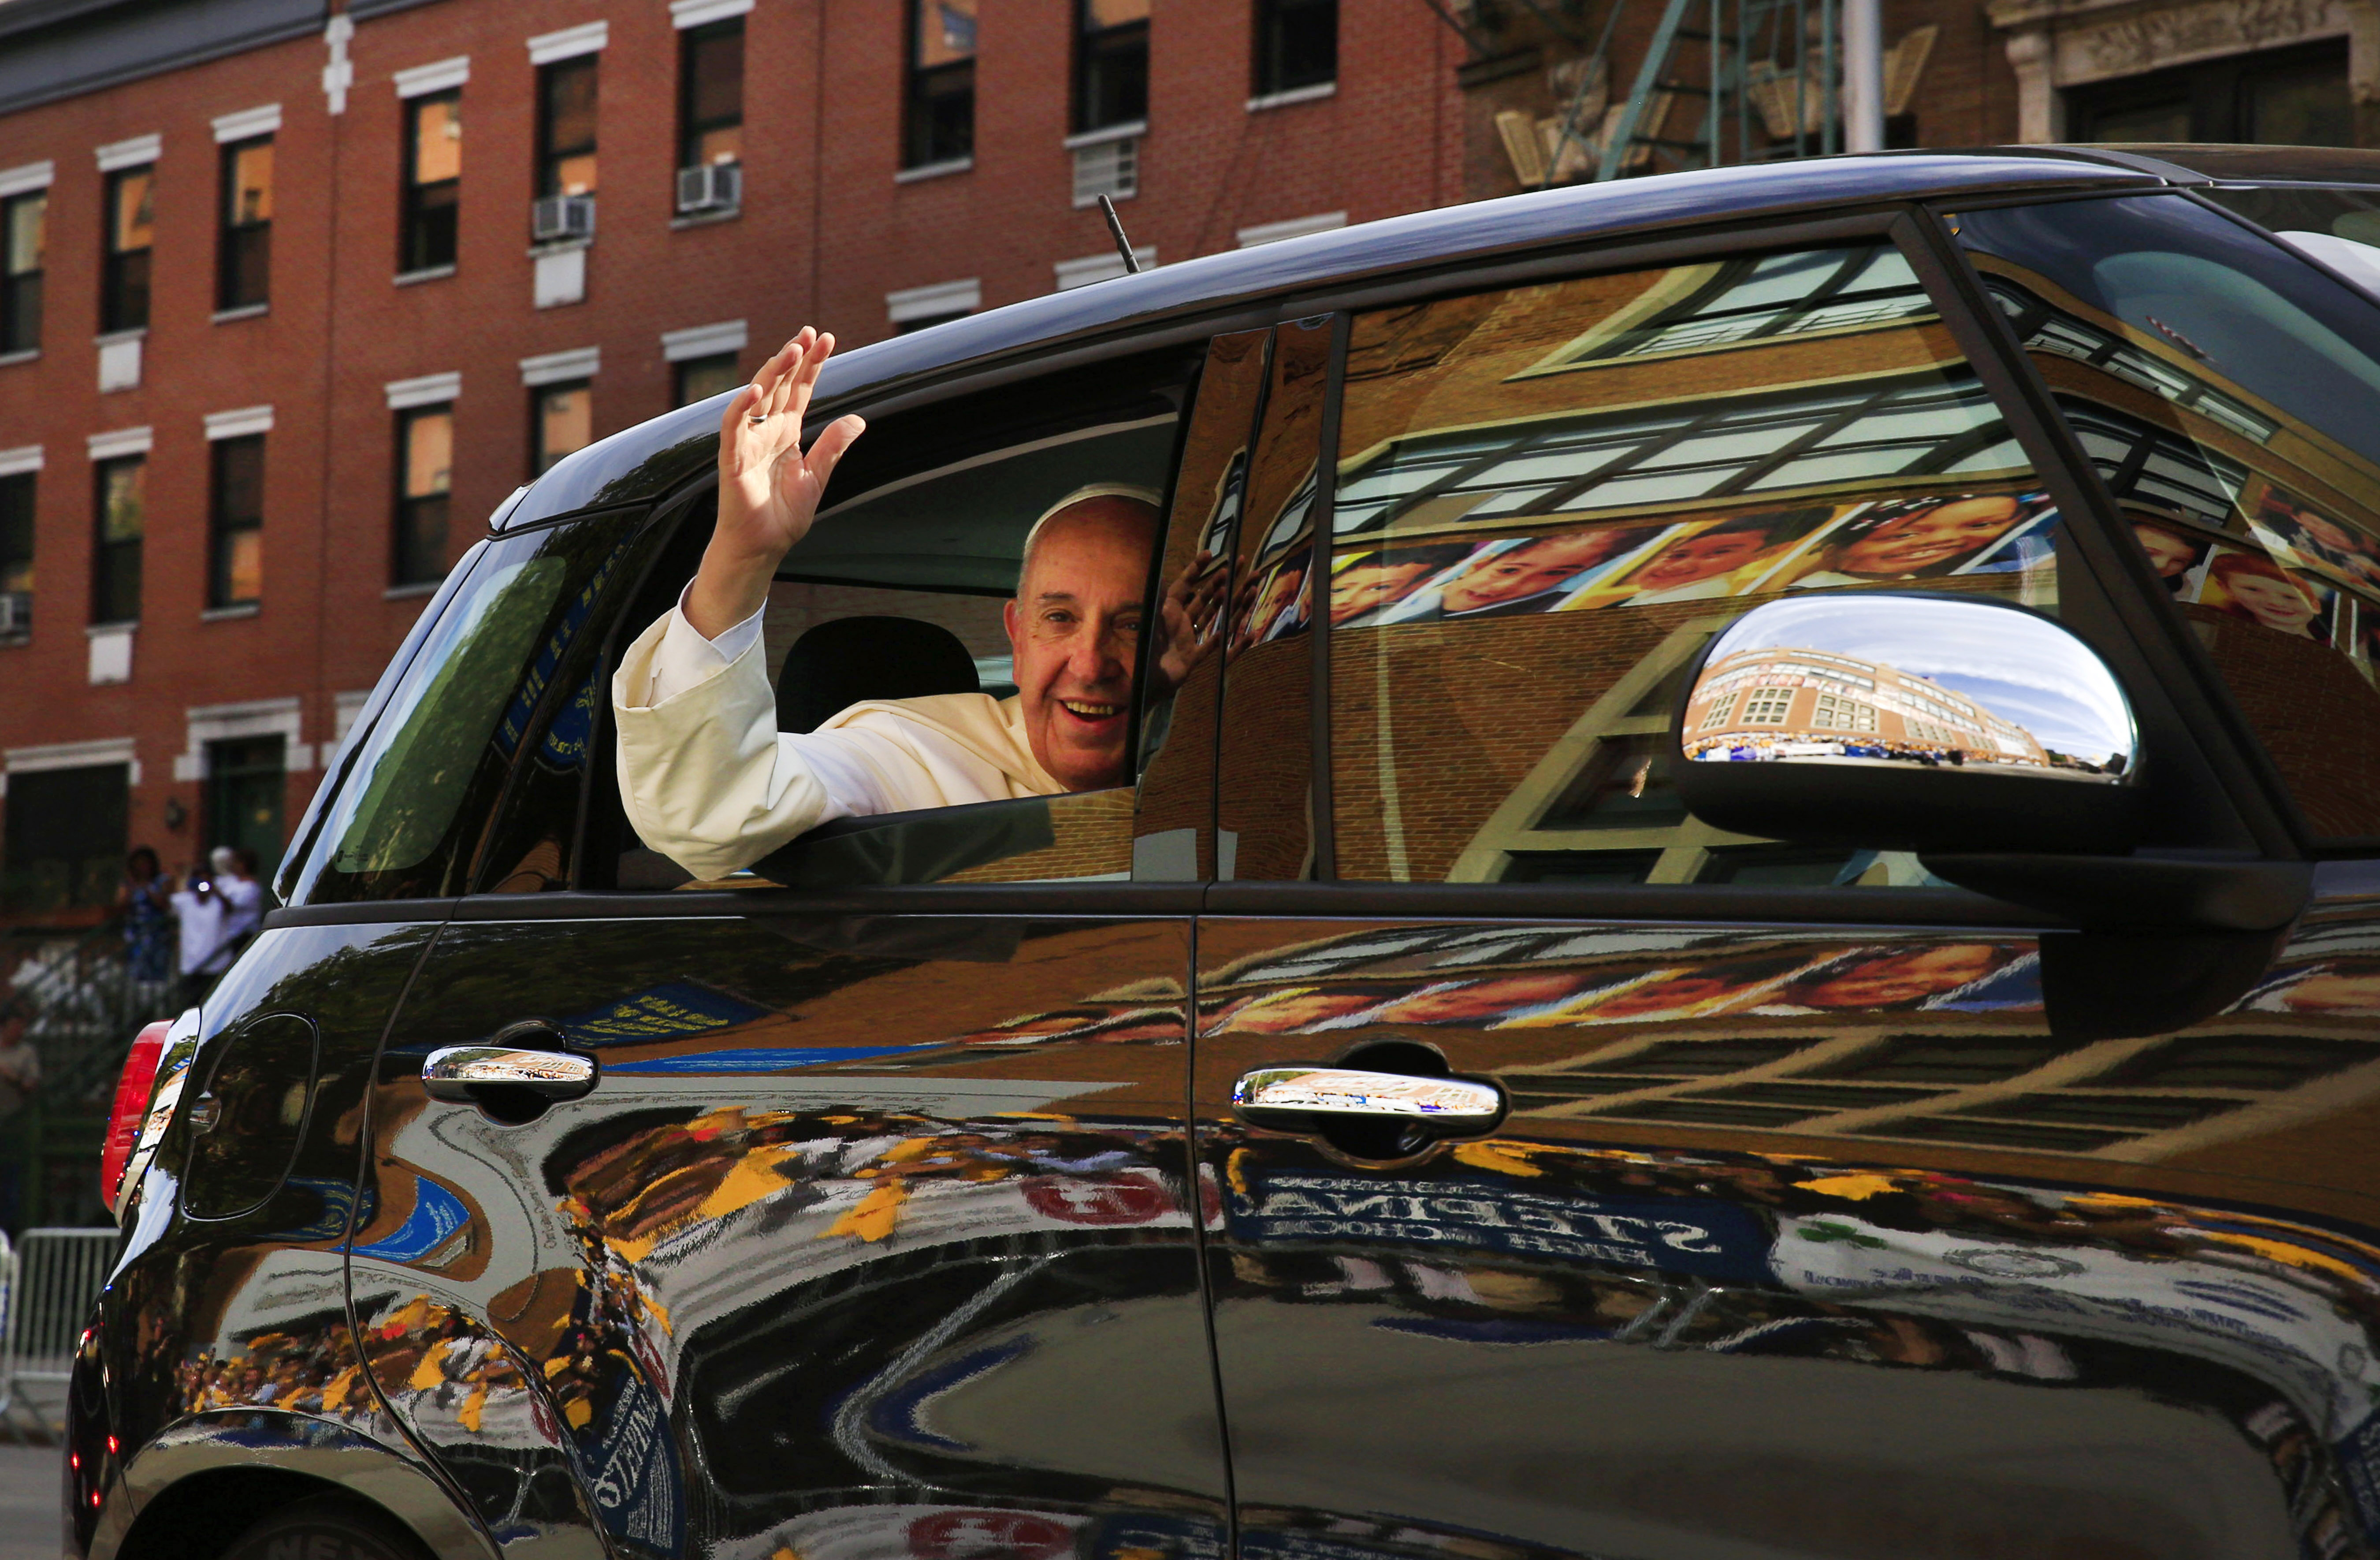 Pope Francis arrives in his car for a visit to Our Lady Queen of Angels School in the Harlem neighborhood of New York, on Sept. 25, 2015.